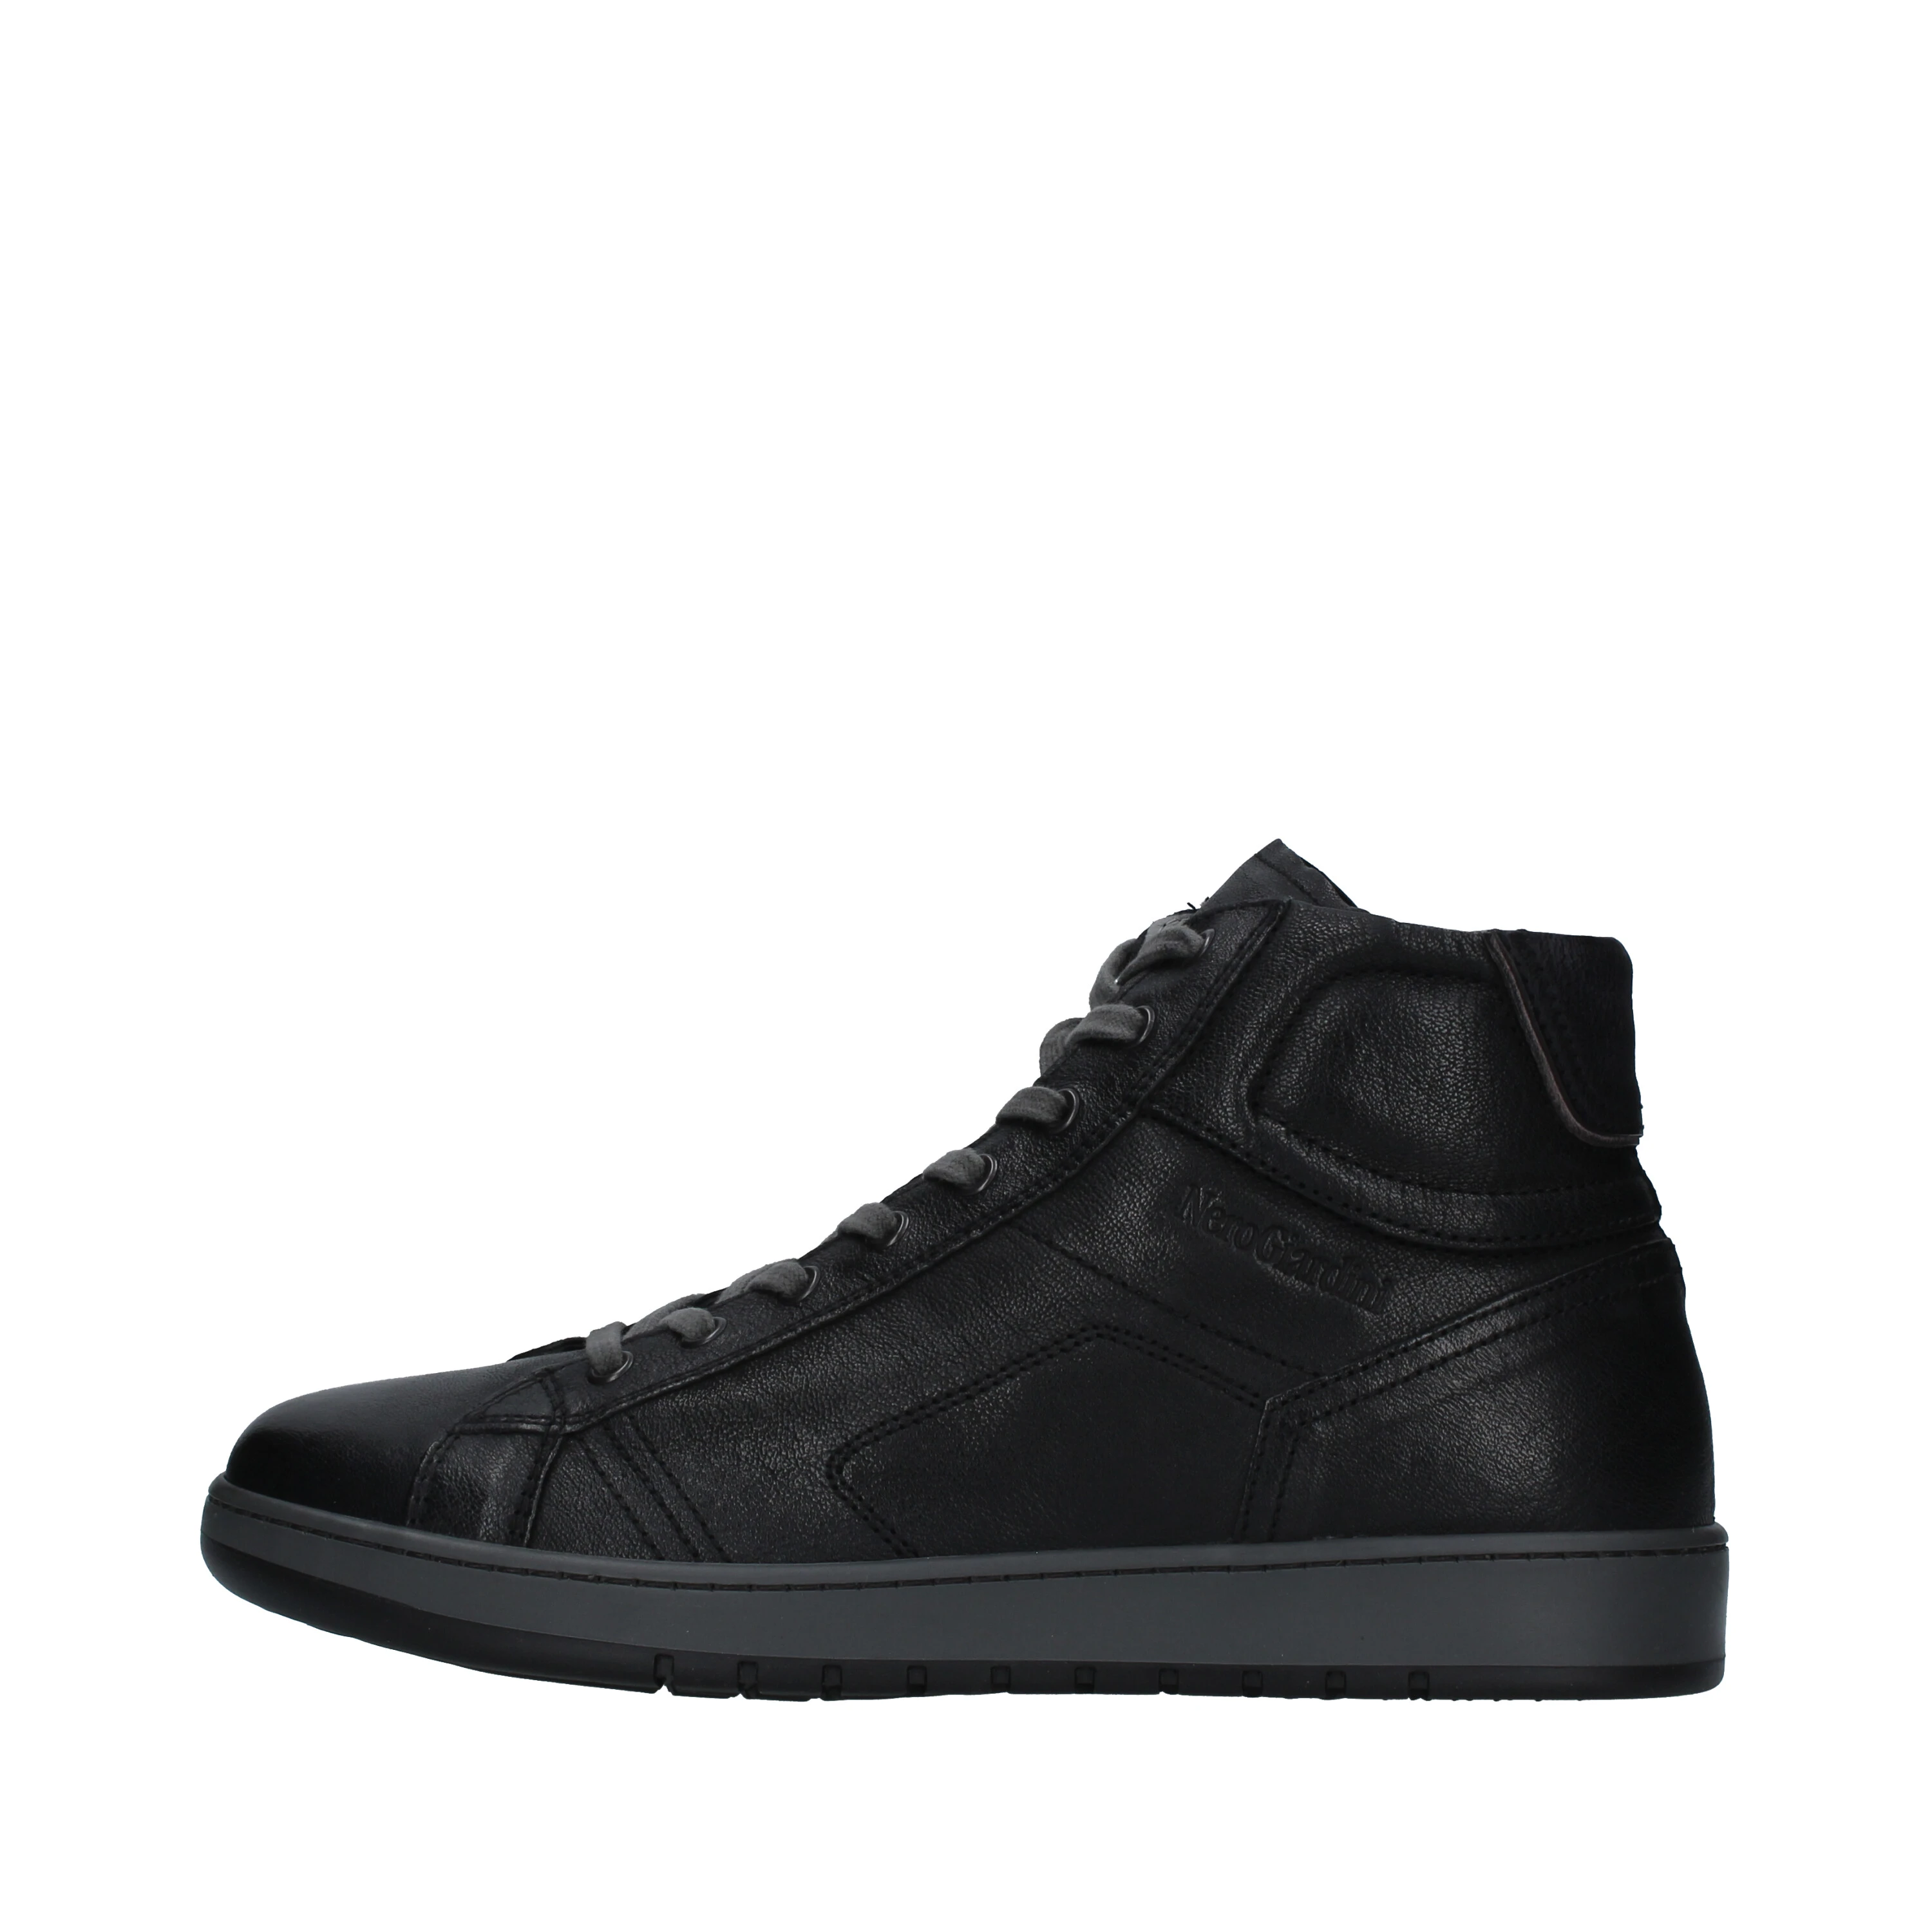 SNEAKERS ALTE CON ZIP LATERALE UOMO NERO - Step By Step